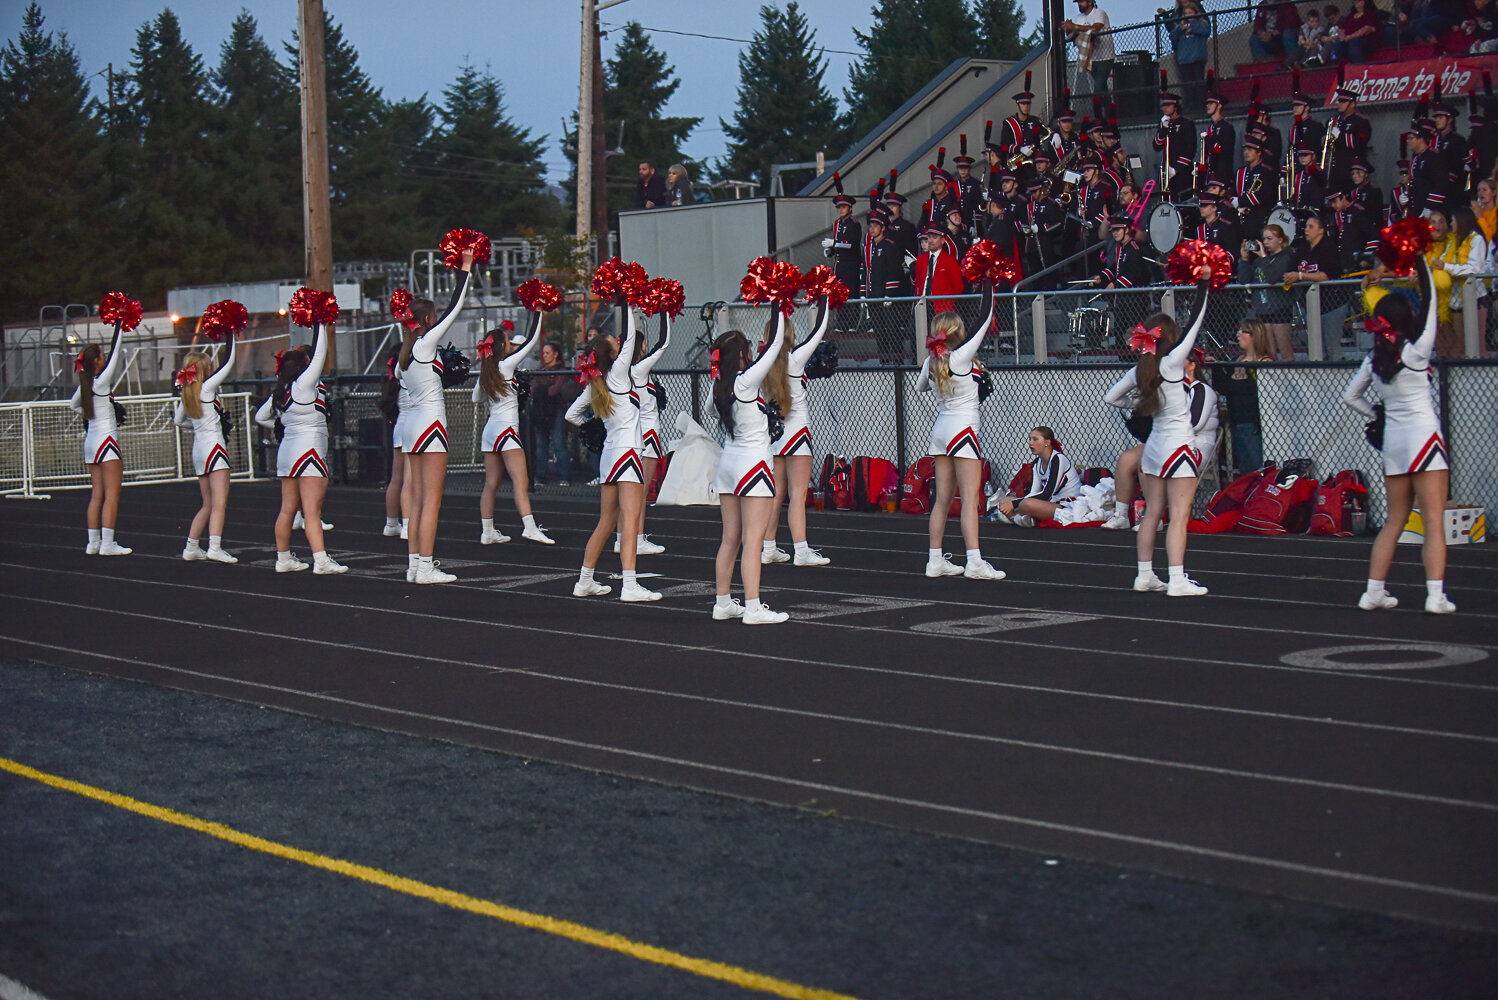 The Tenino cheer team looks to hype up the crowd during Tenino's game against Onalaska on Sept. 22.